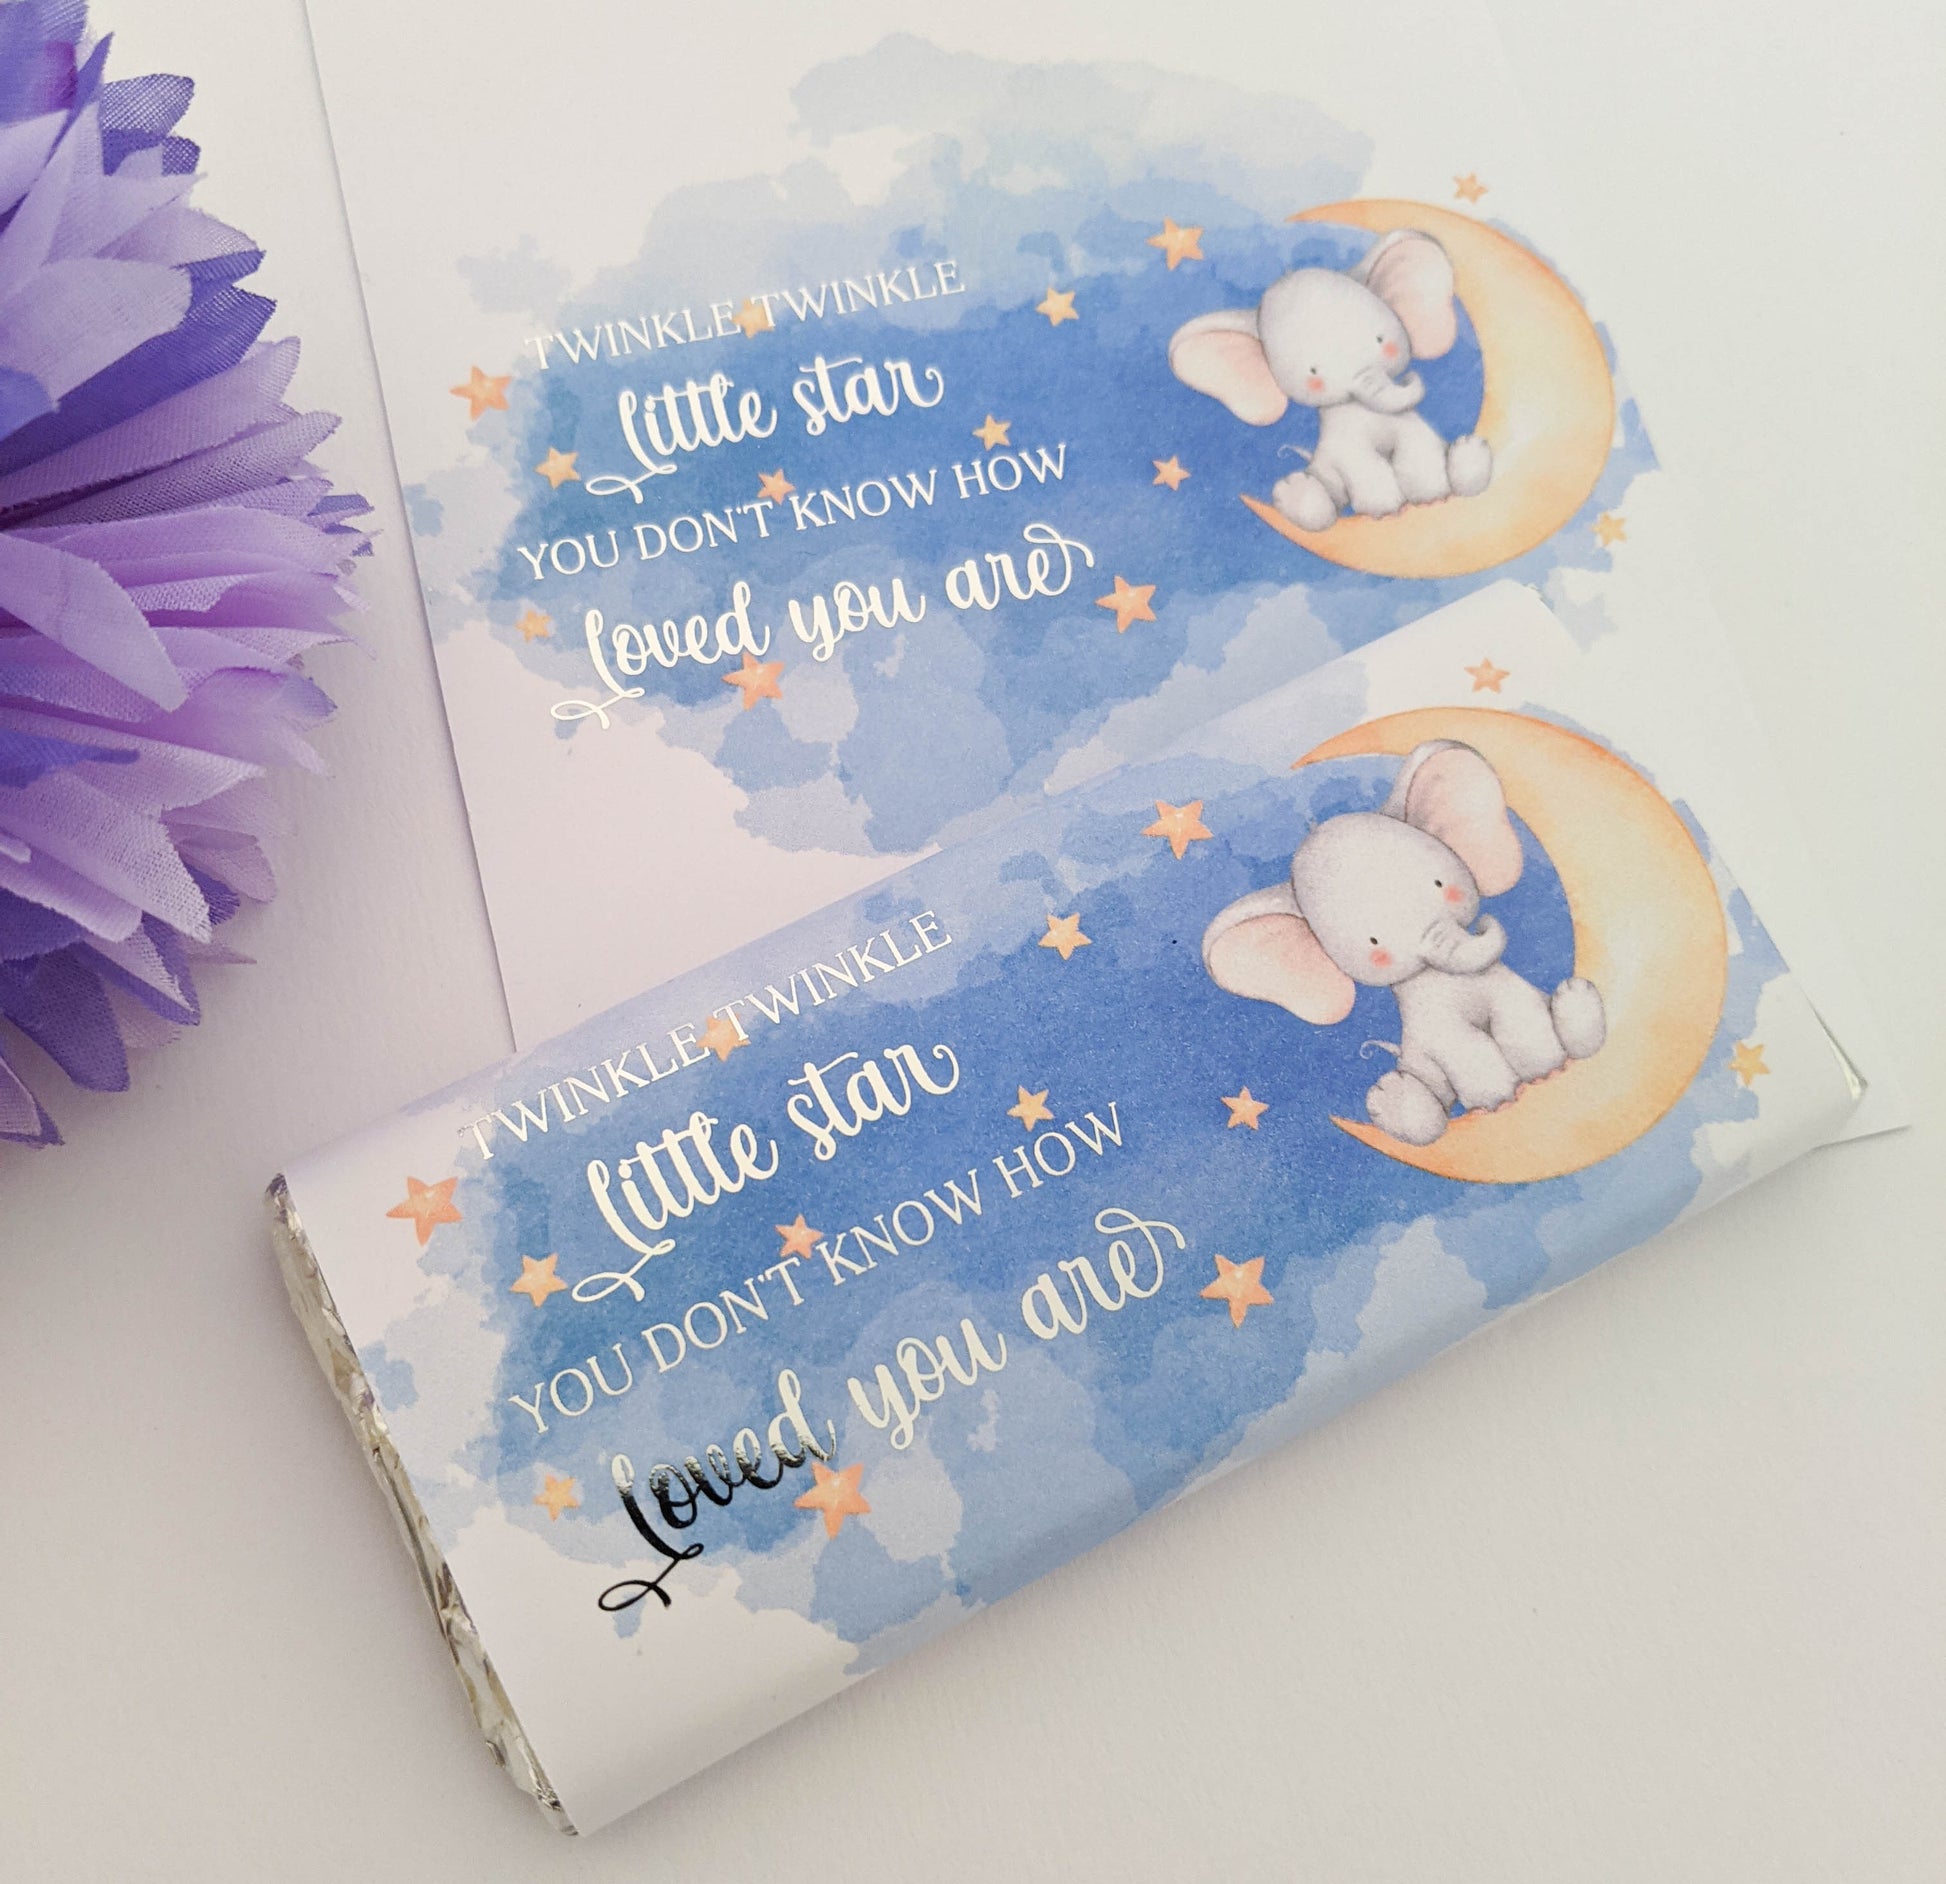 E&L Designs Twinkle Twinkle Little Star Chocolate Wrappers, Set of 10